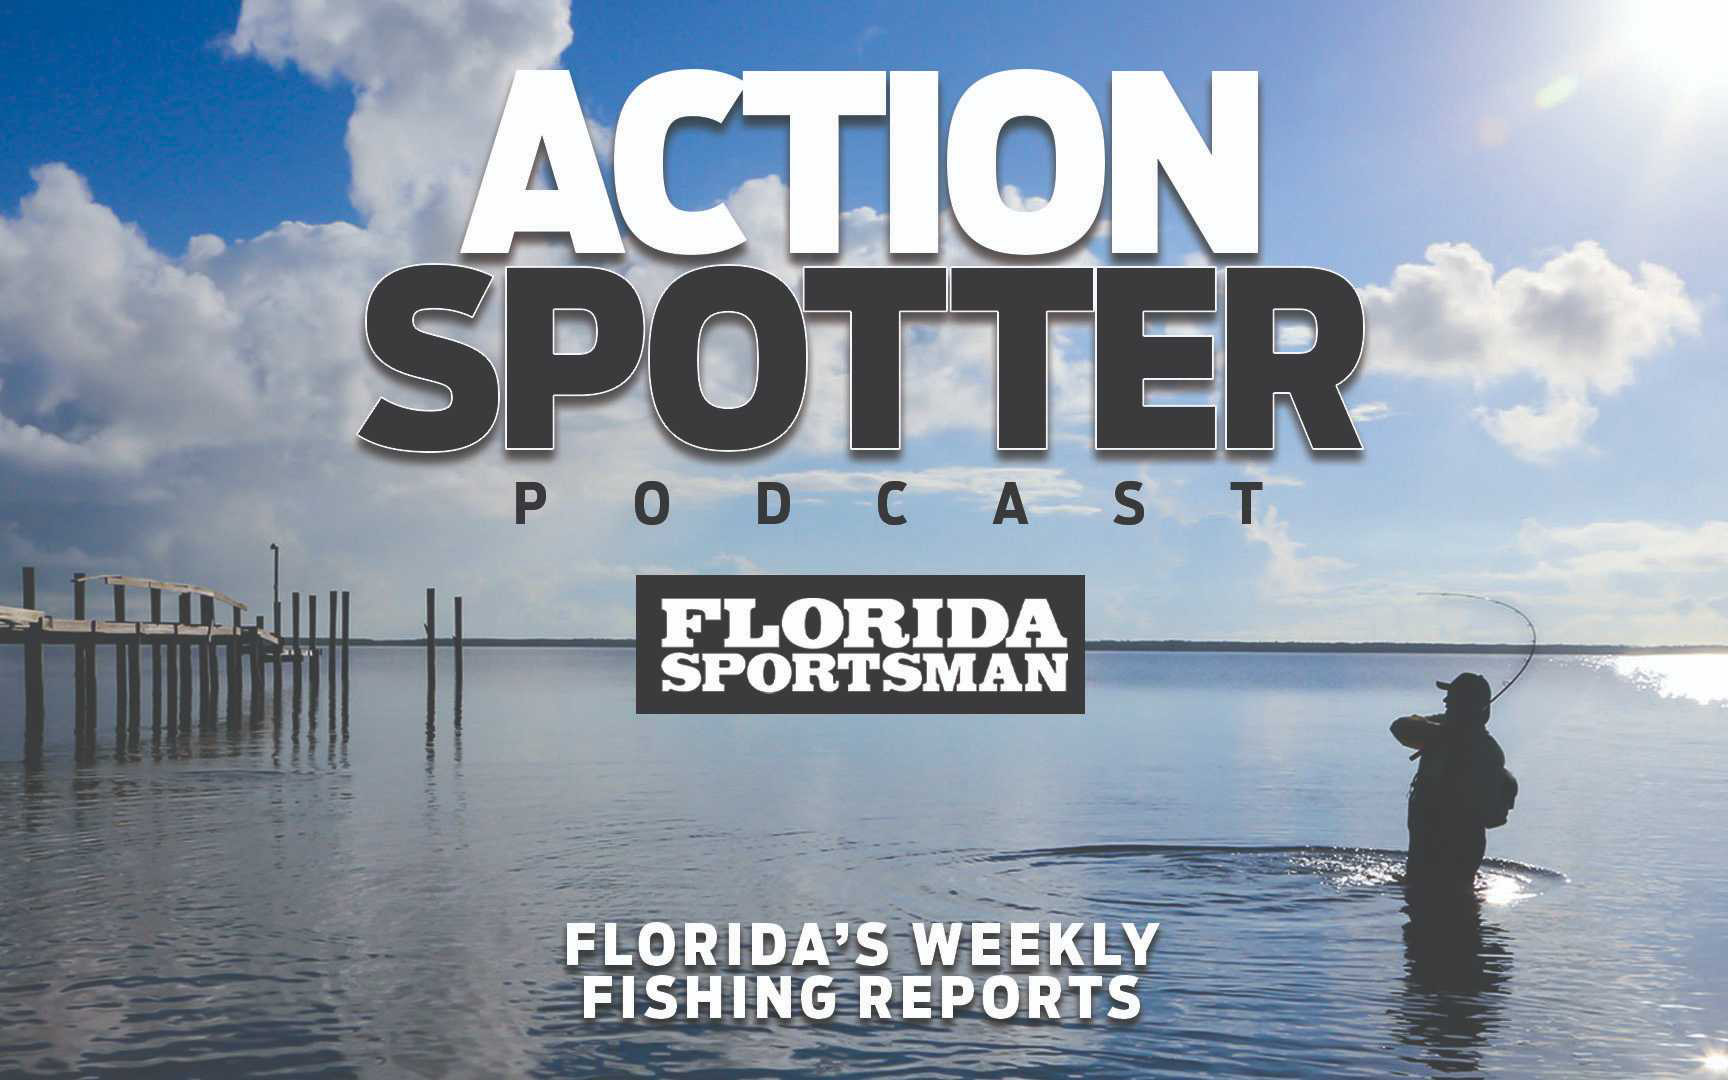 Florida Sportsman Launches Action Spotter Podcast